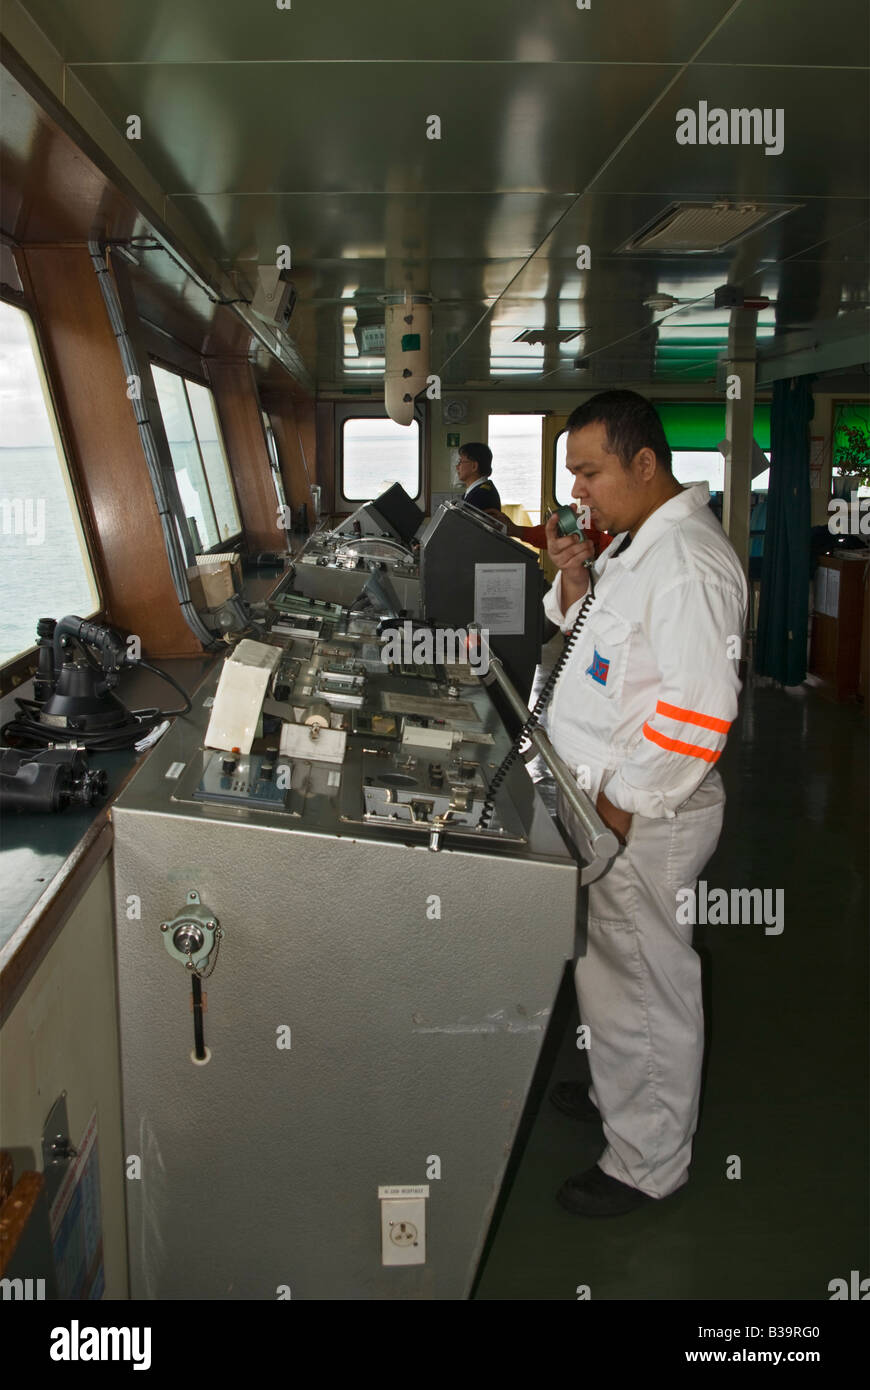 A crew member of a ship entering port holds a microphone while making a call on the ship's public address system. Stock Photo